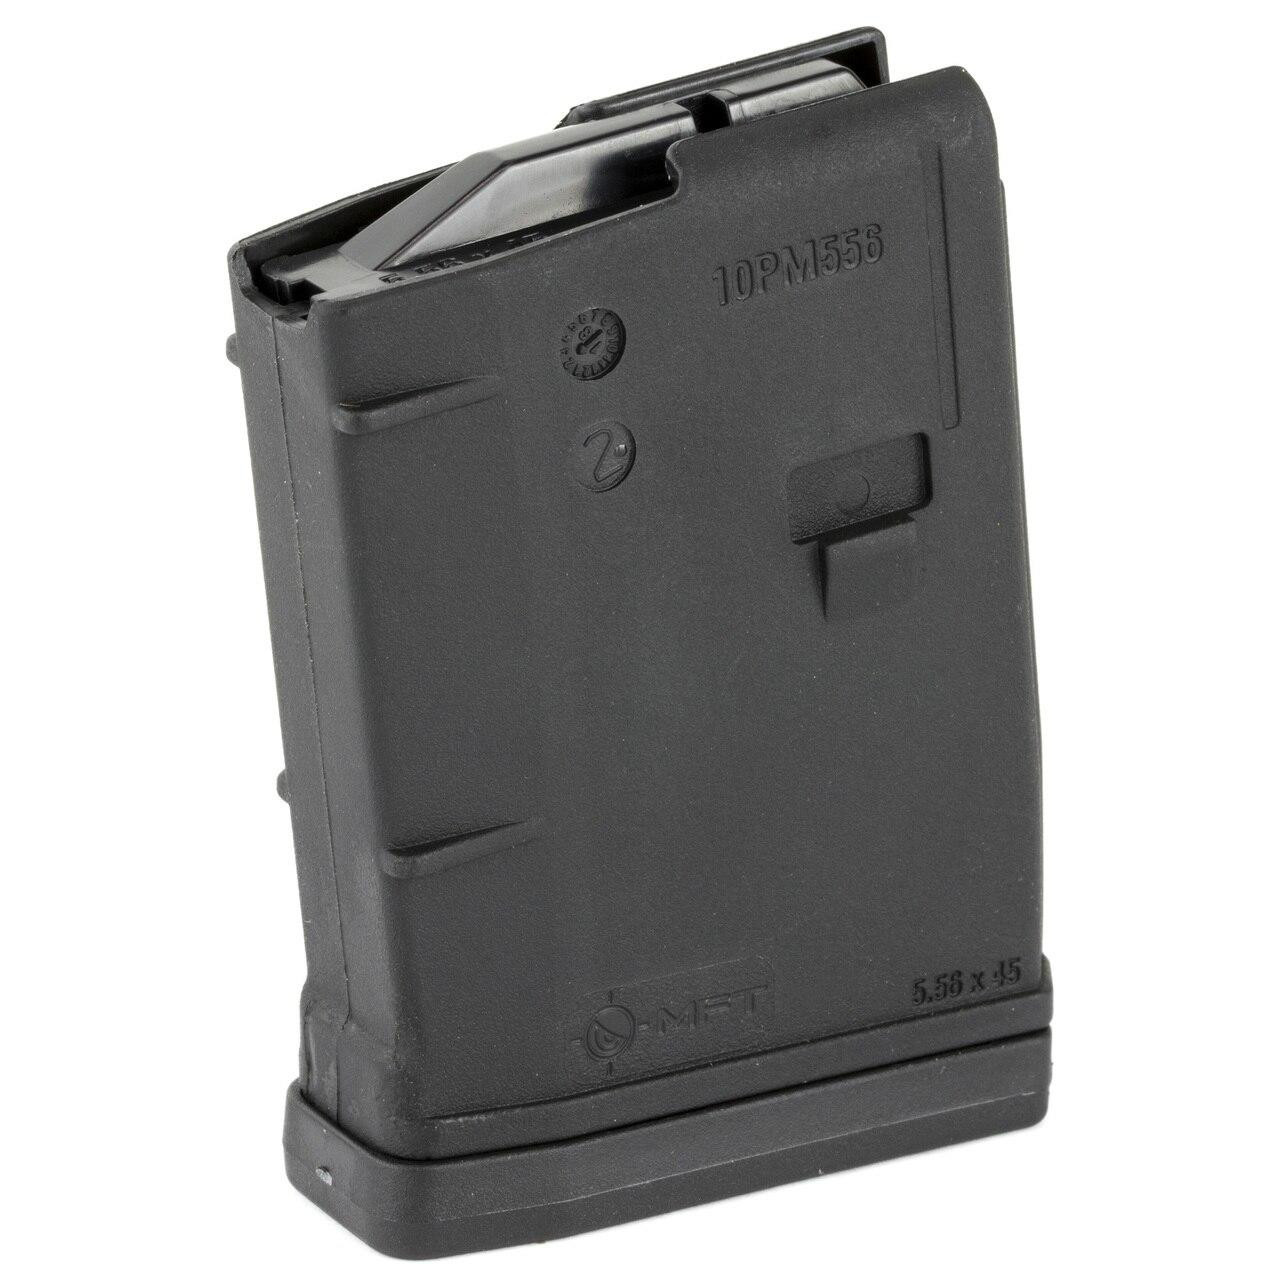 Mission First Tactical Mag Mft 5.56 10rd Blk 676315033615